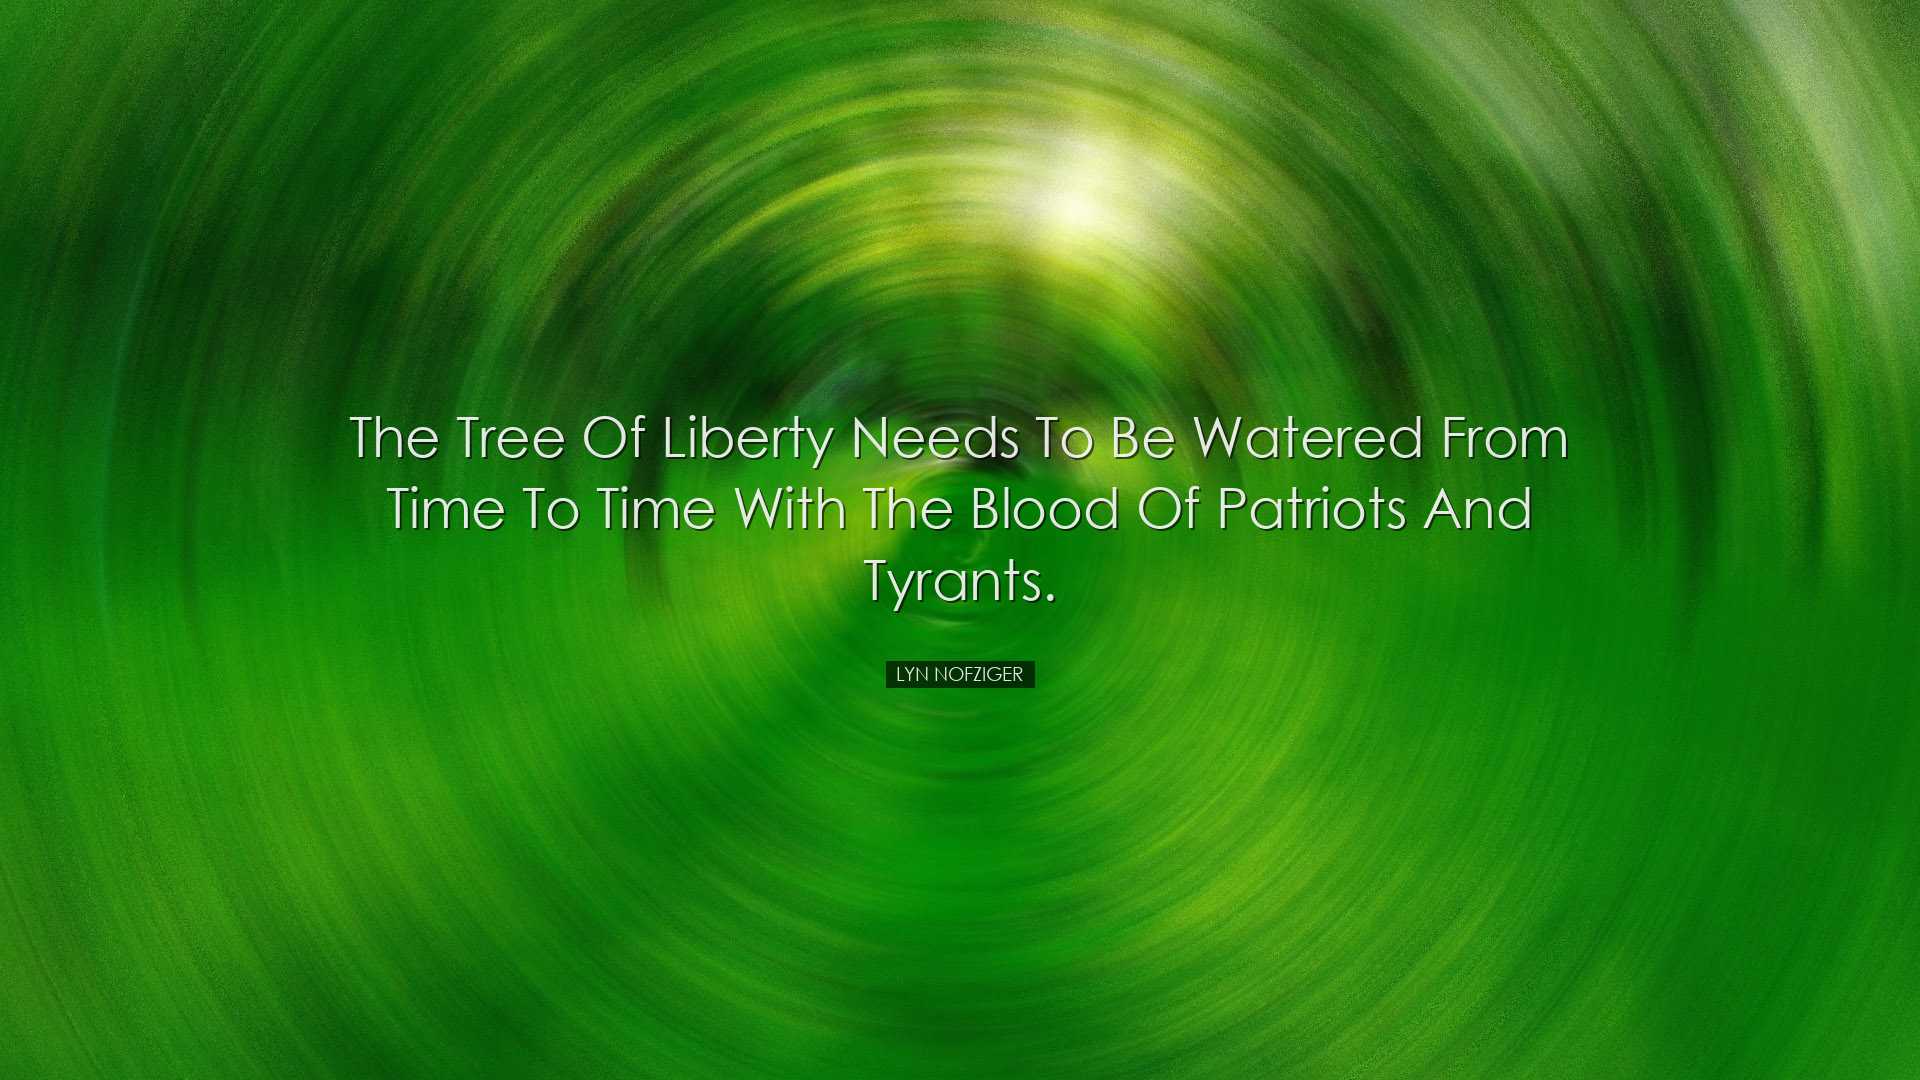 The tree of liberty needs to be watered from time to time with the